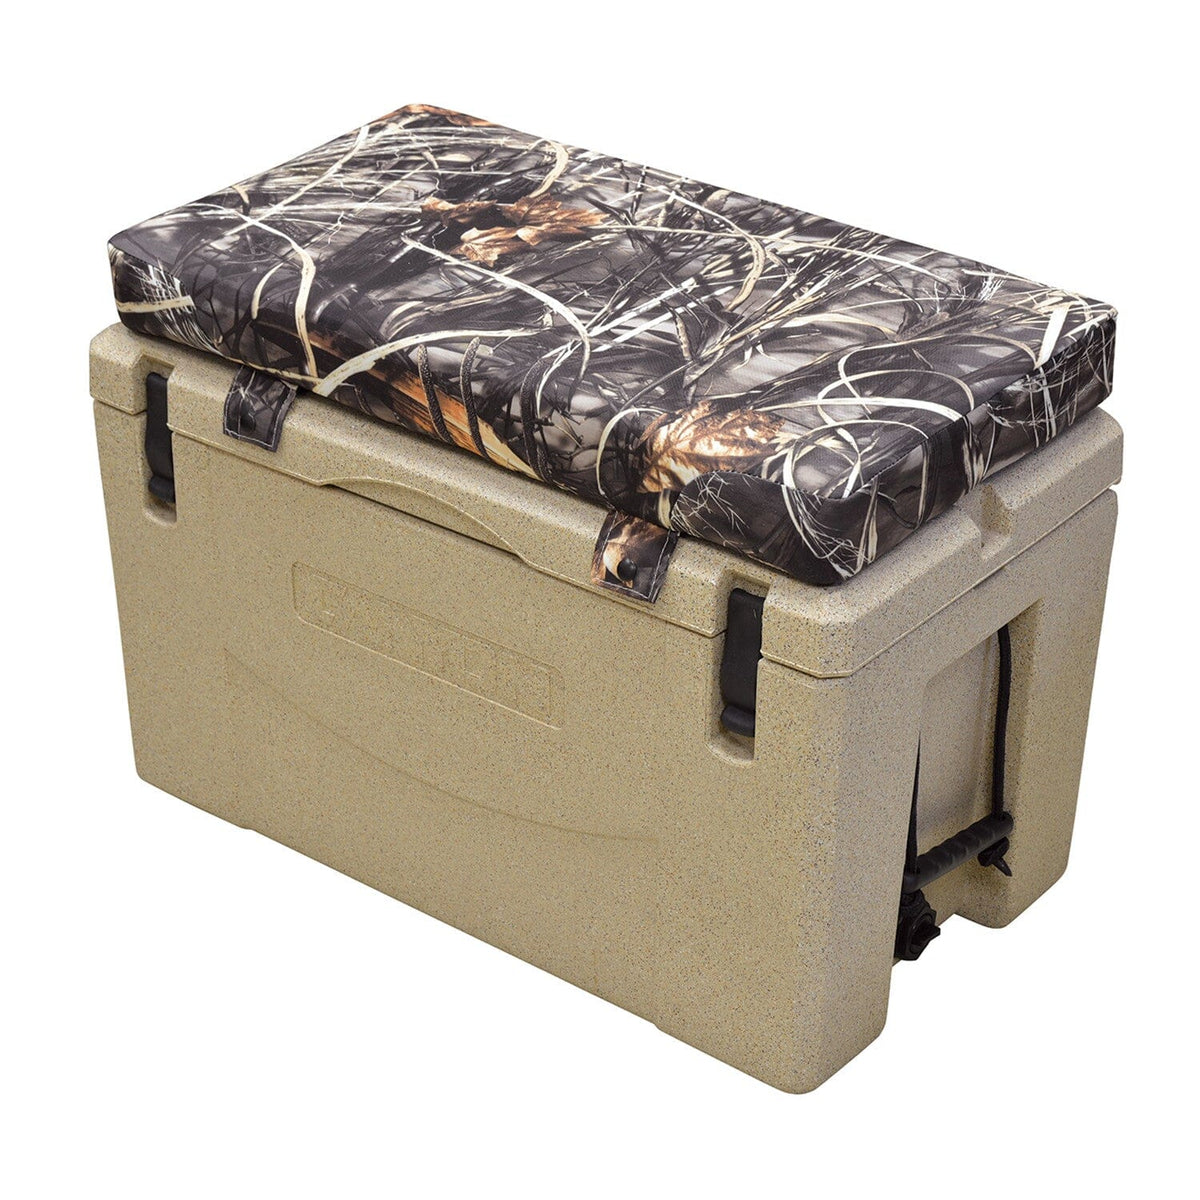 Wise Outdoors - 20 Qt Cooler Cushion - Fits Yeti Roadie / Orca 20